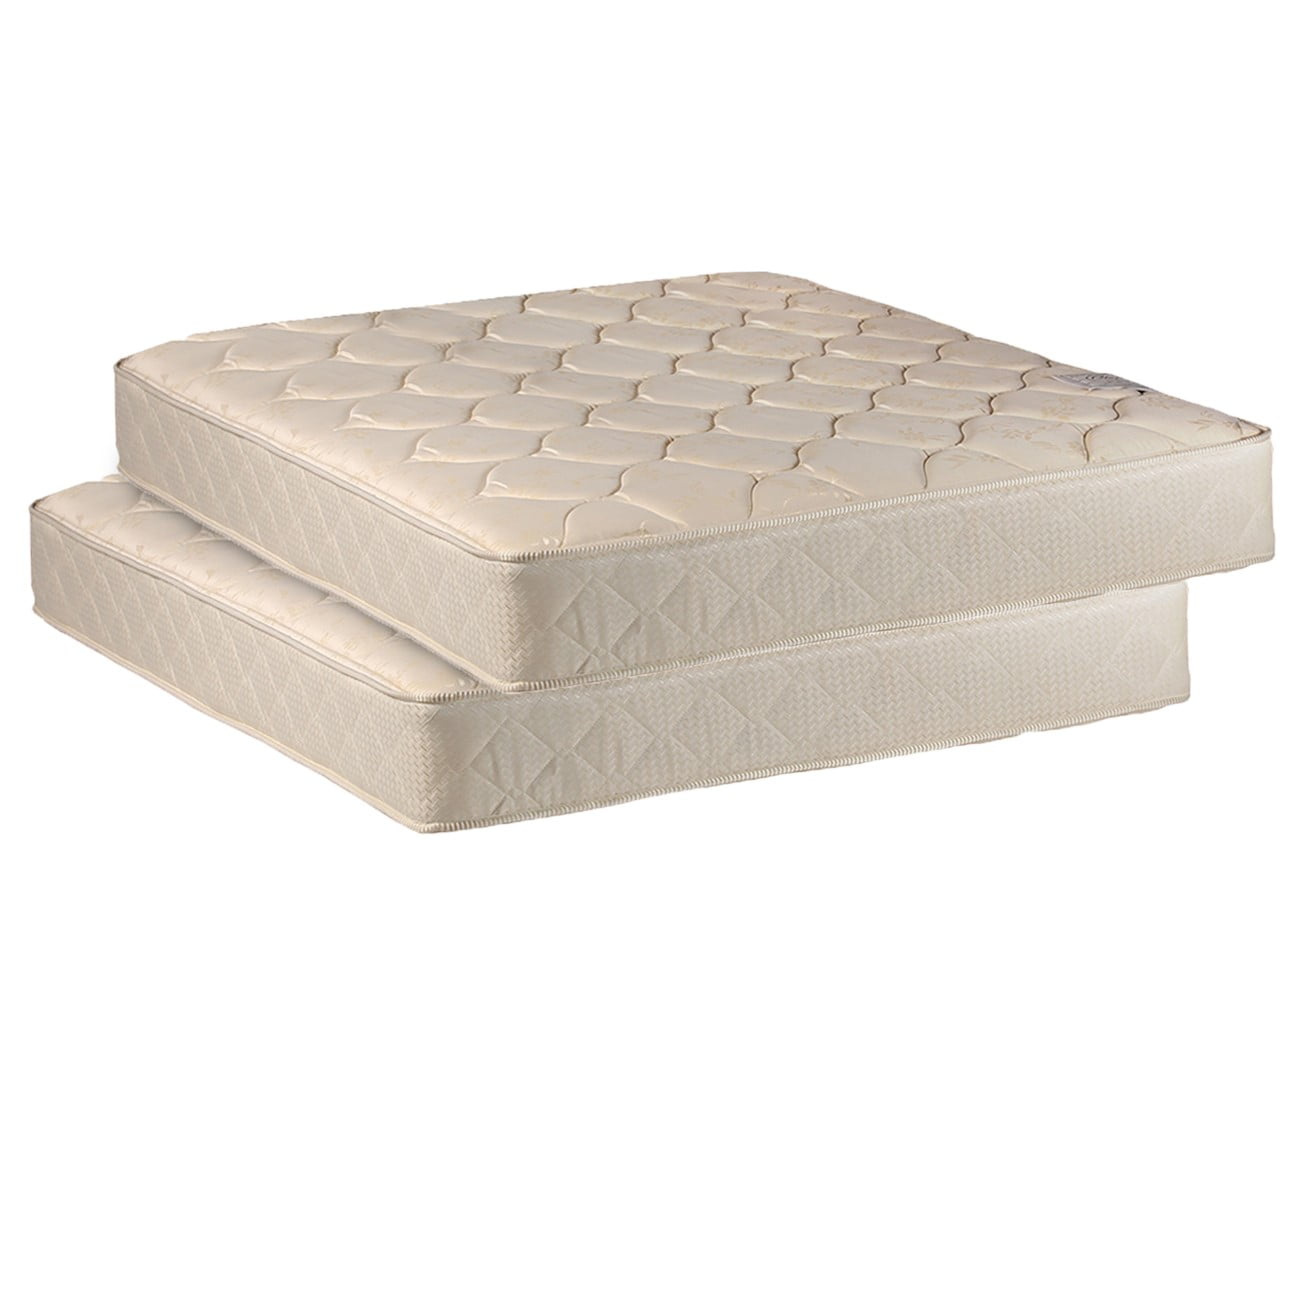 Two Twin Mattresses Package For Bunk, Do Bunk Beds Use Twin Mattresses